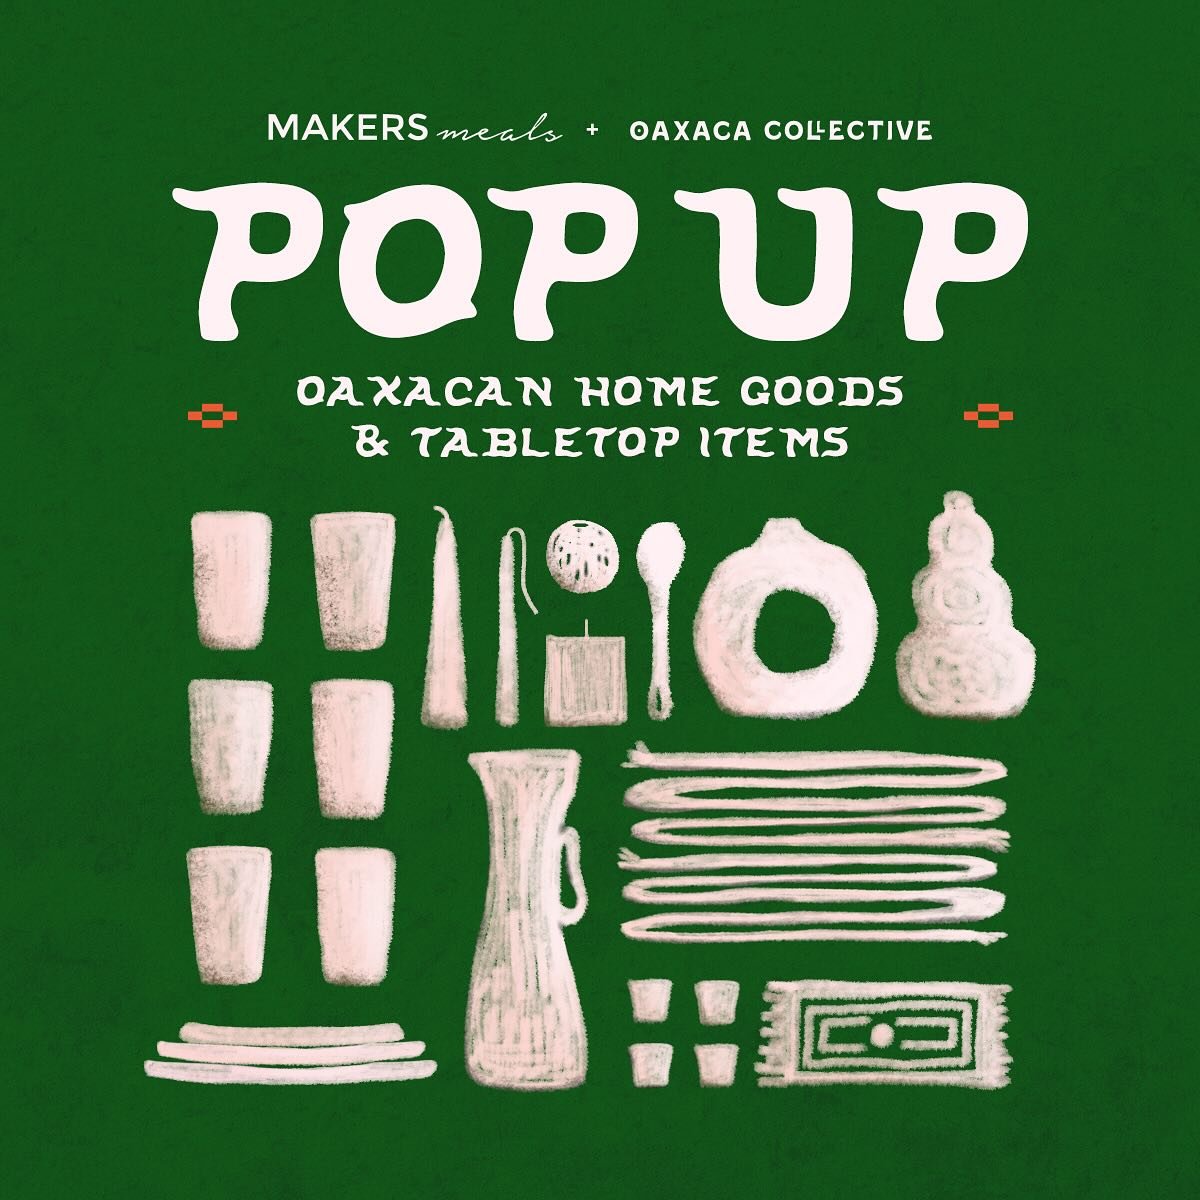 We&rsquo;re bringing Oaxaca vibes to Virginia Beach! Join @makersmeals x @oaxacacollective for a joint pop-up of Oaxacan home goods and tabletop items ☀️ Sunday, May 05, 12-4pm outside at 4606 Atlantic Ave.